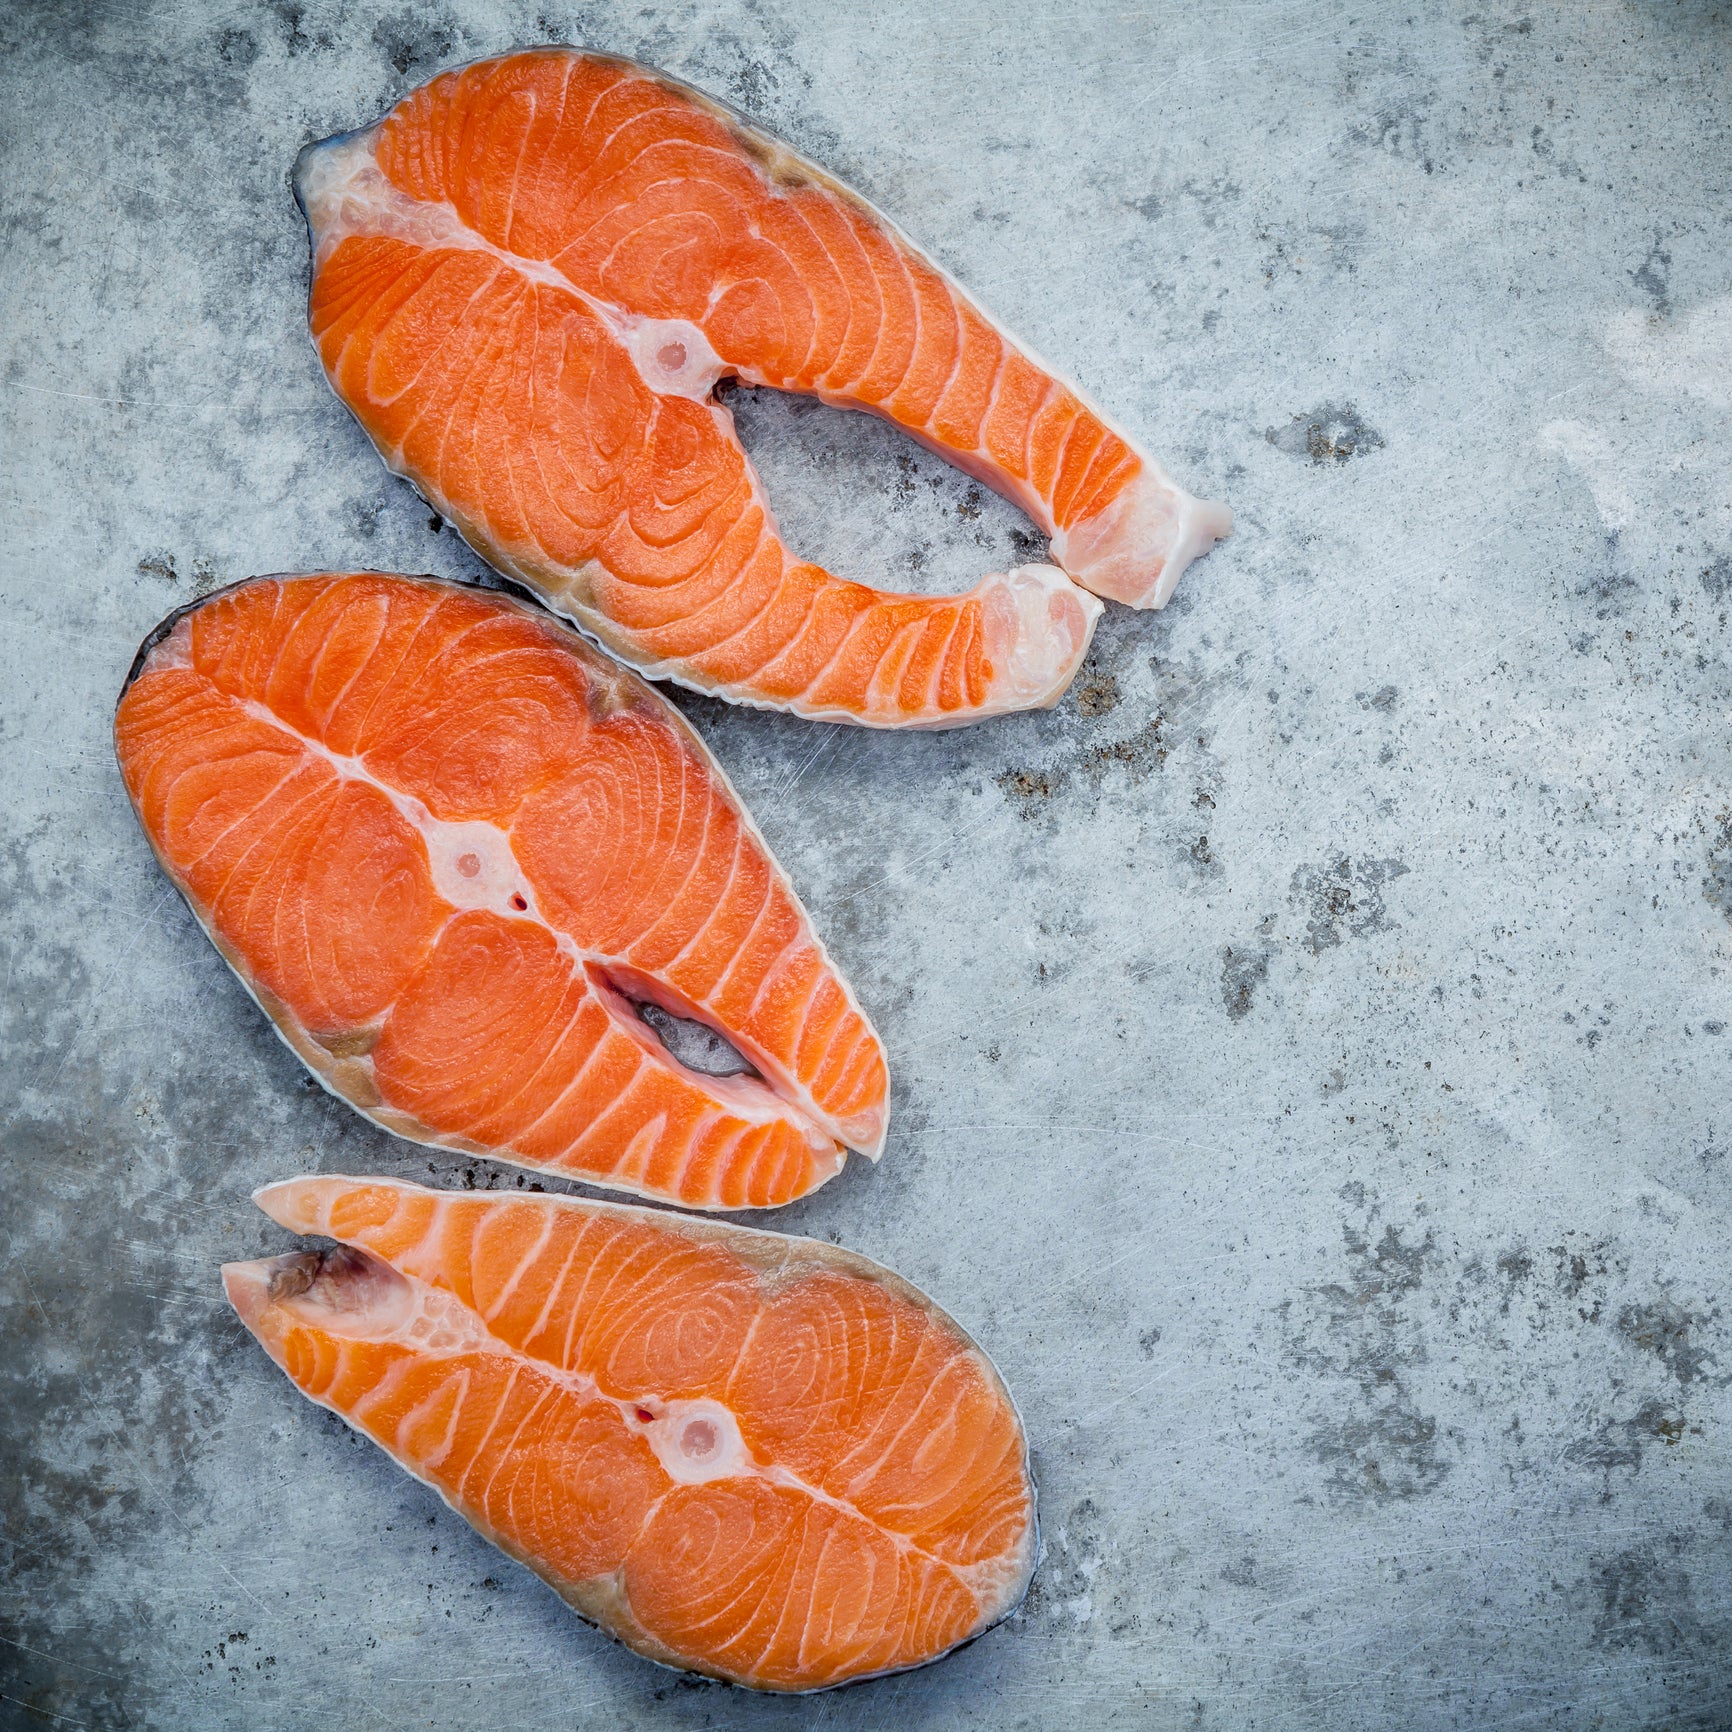 10 Reasons Why Silver Salmon is the Best Catch of the Season - Global Seafoods North America